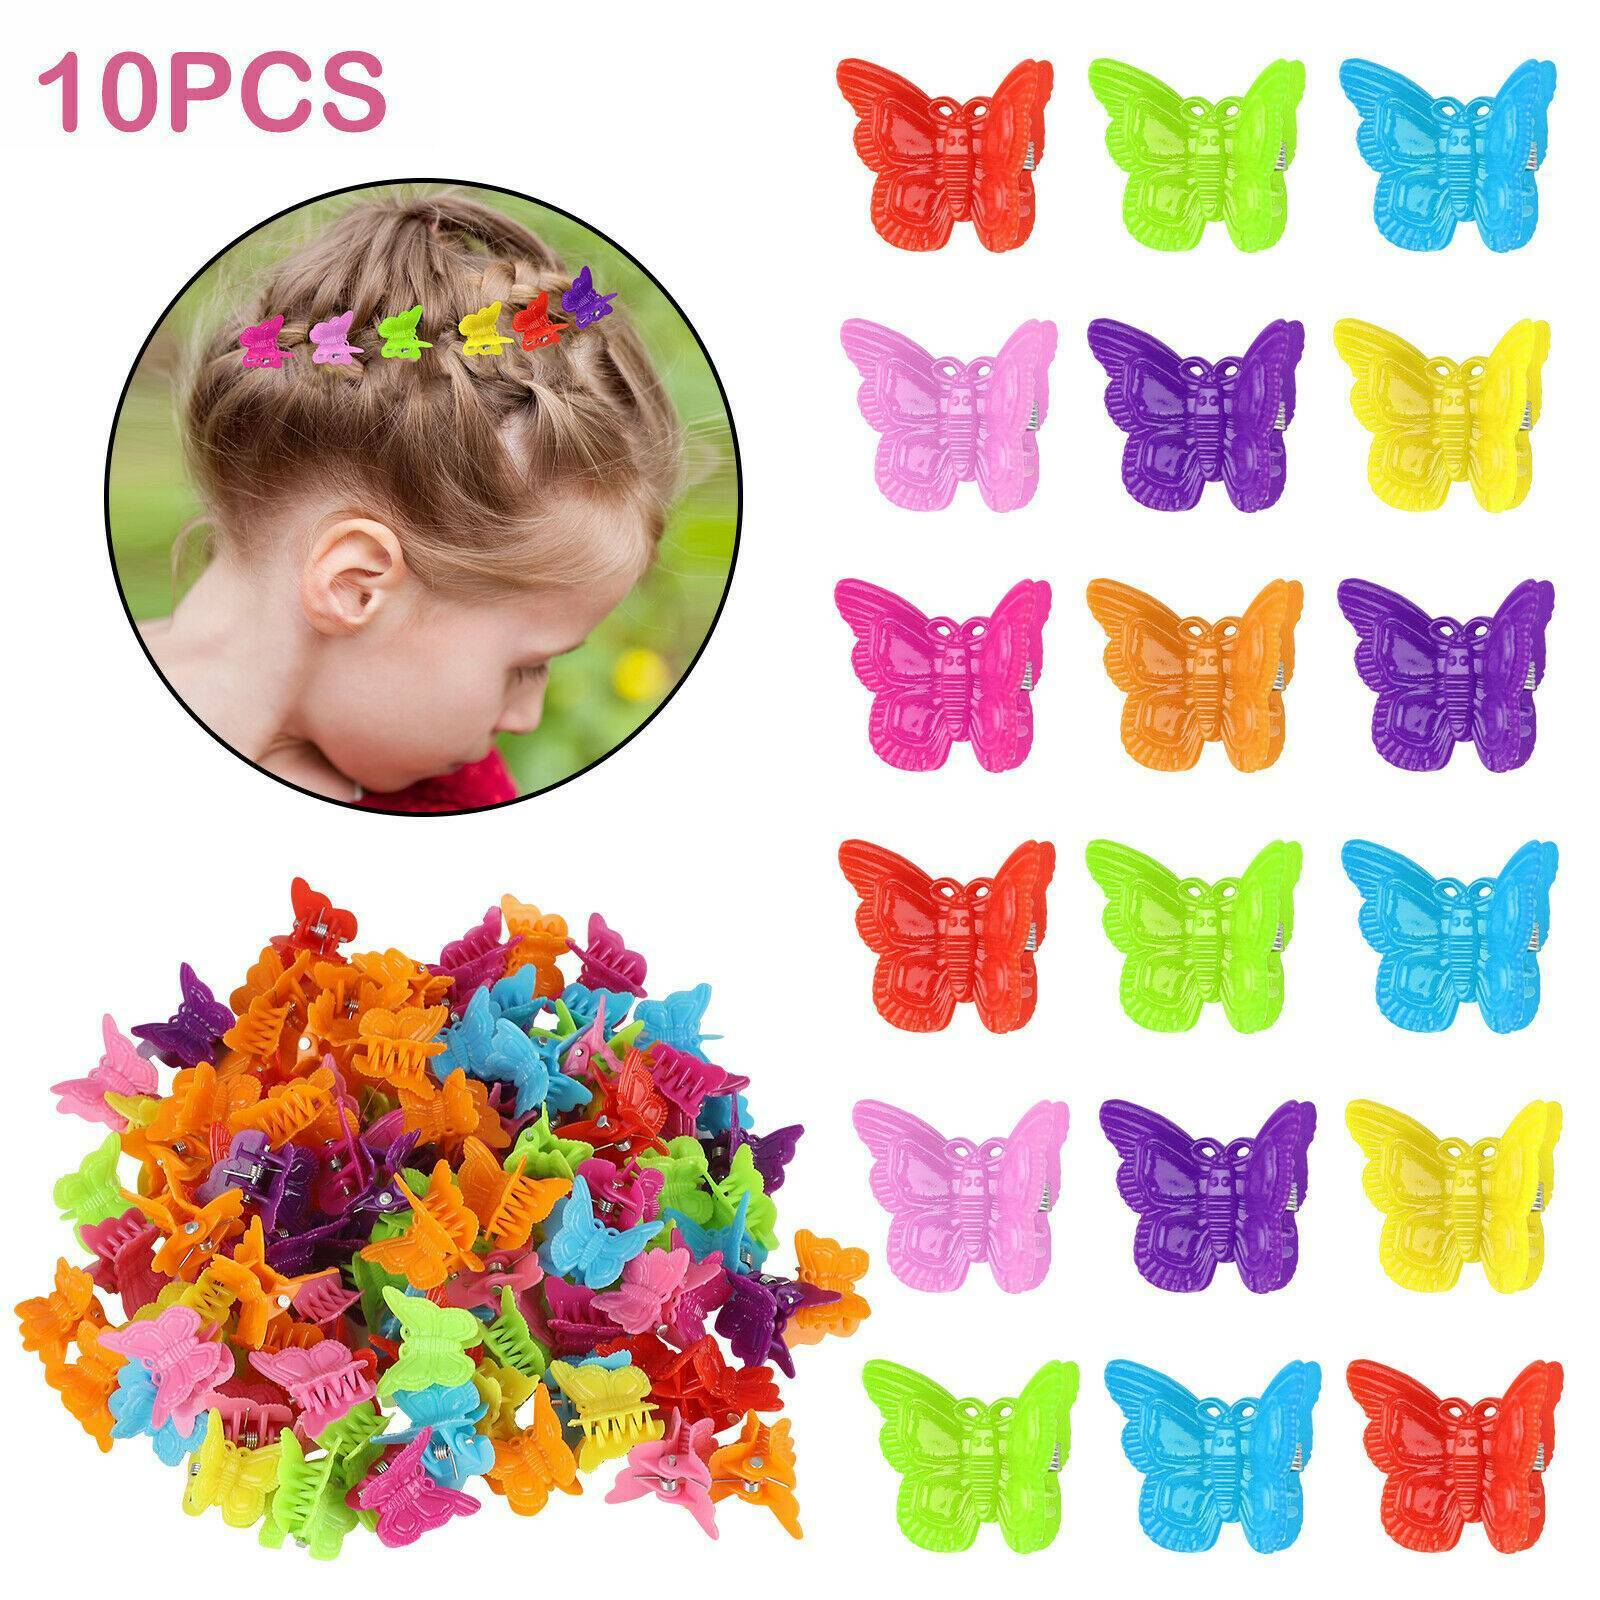 100Pcs Mini Butterfly Hair Clips Barrette Accessories Assorted Color for Women